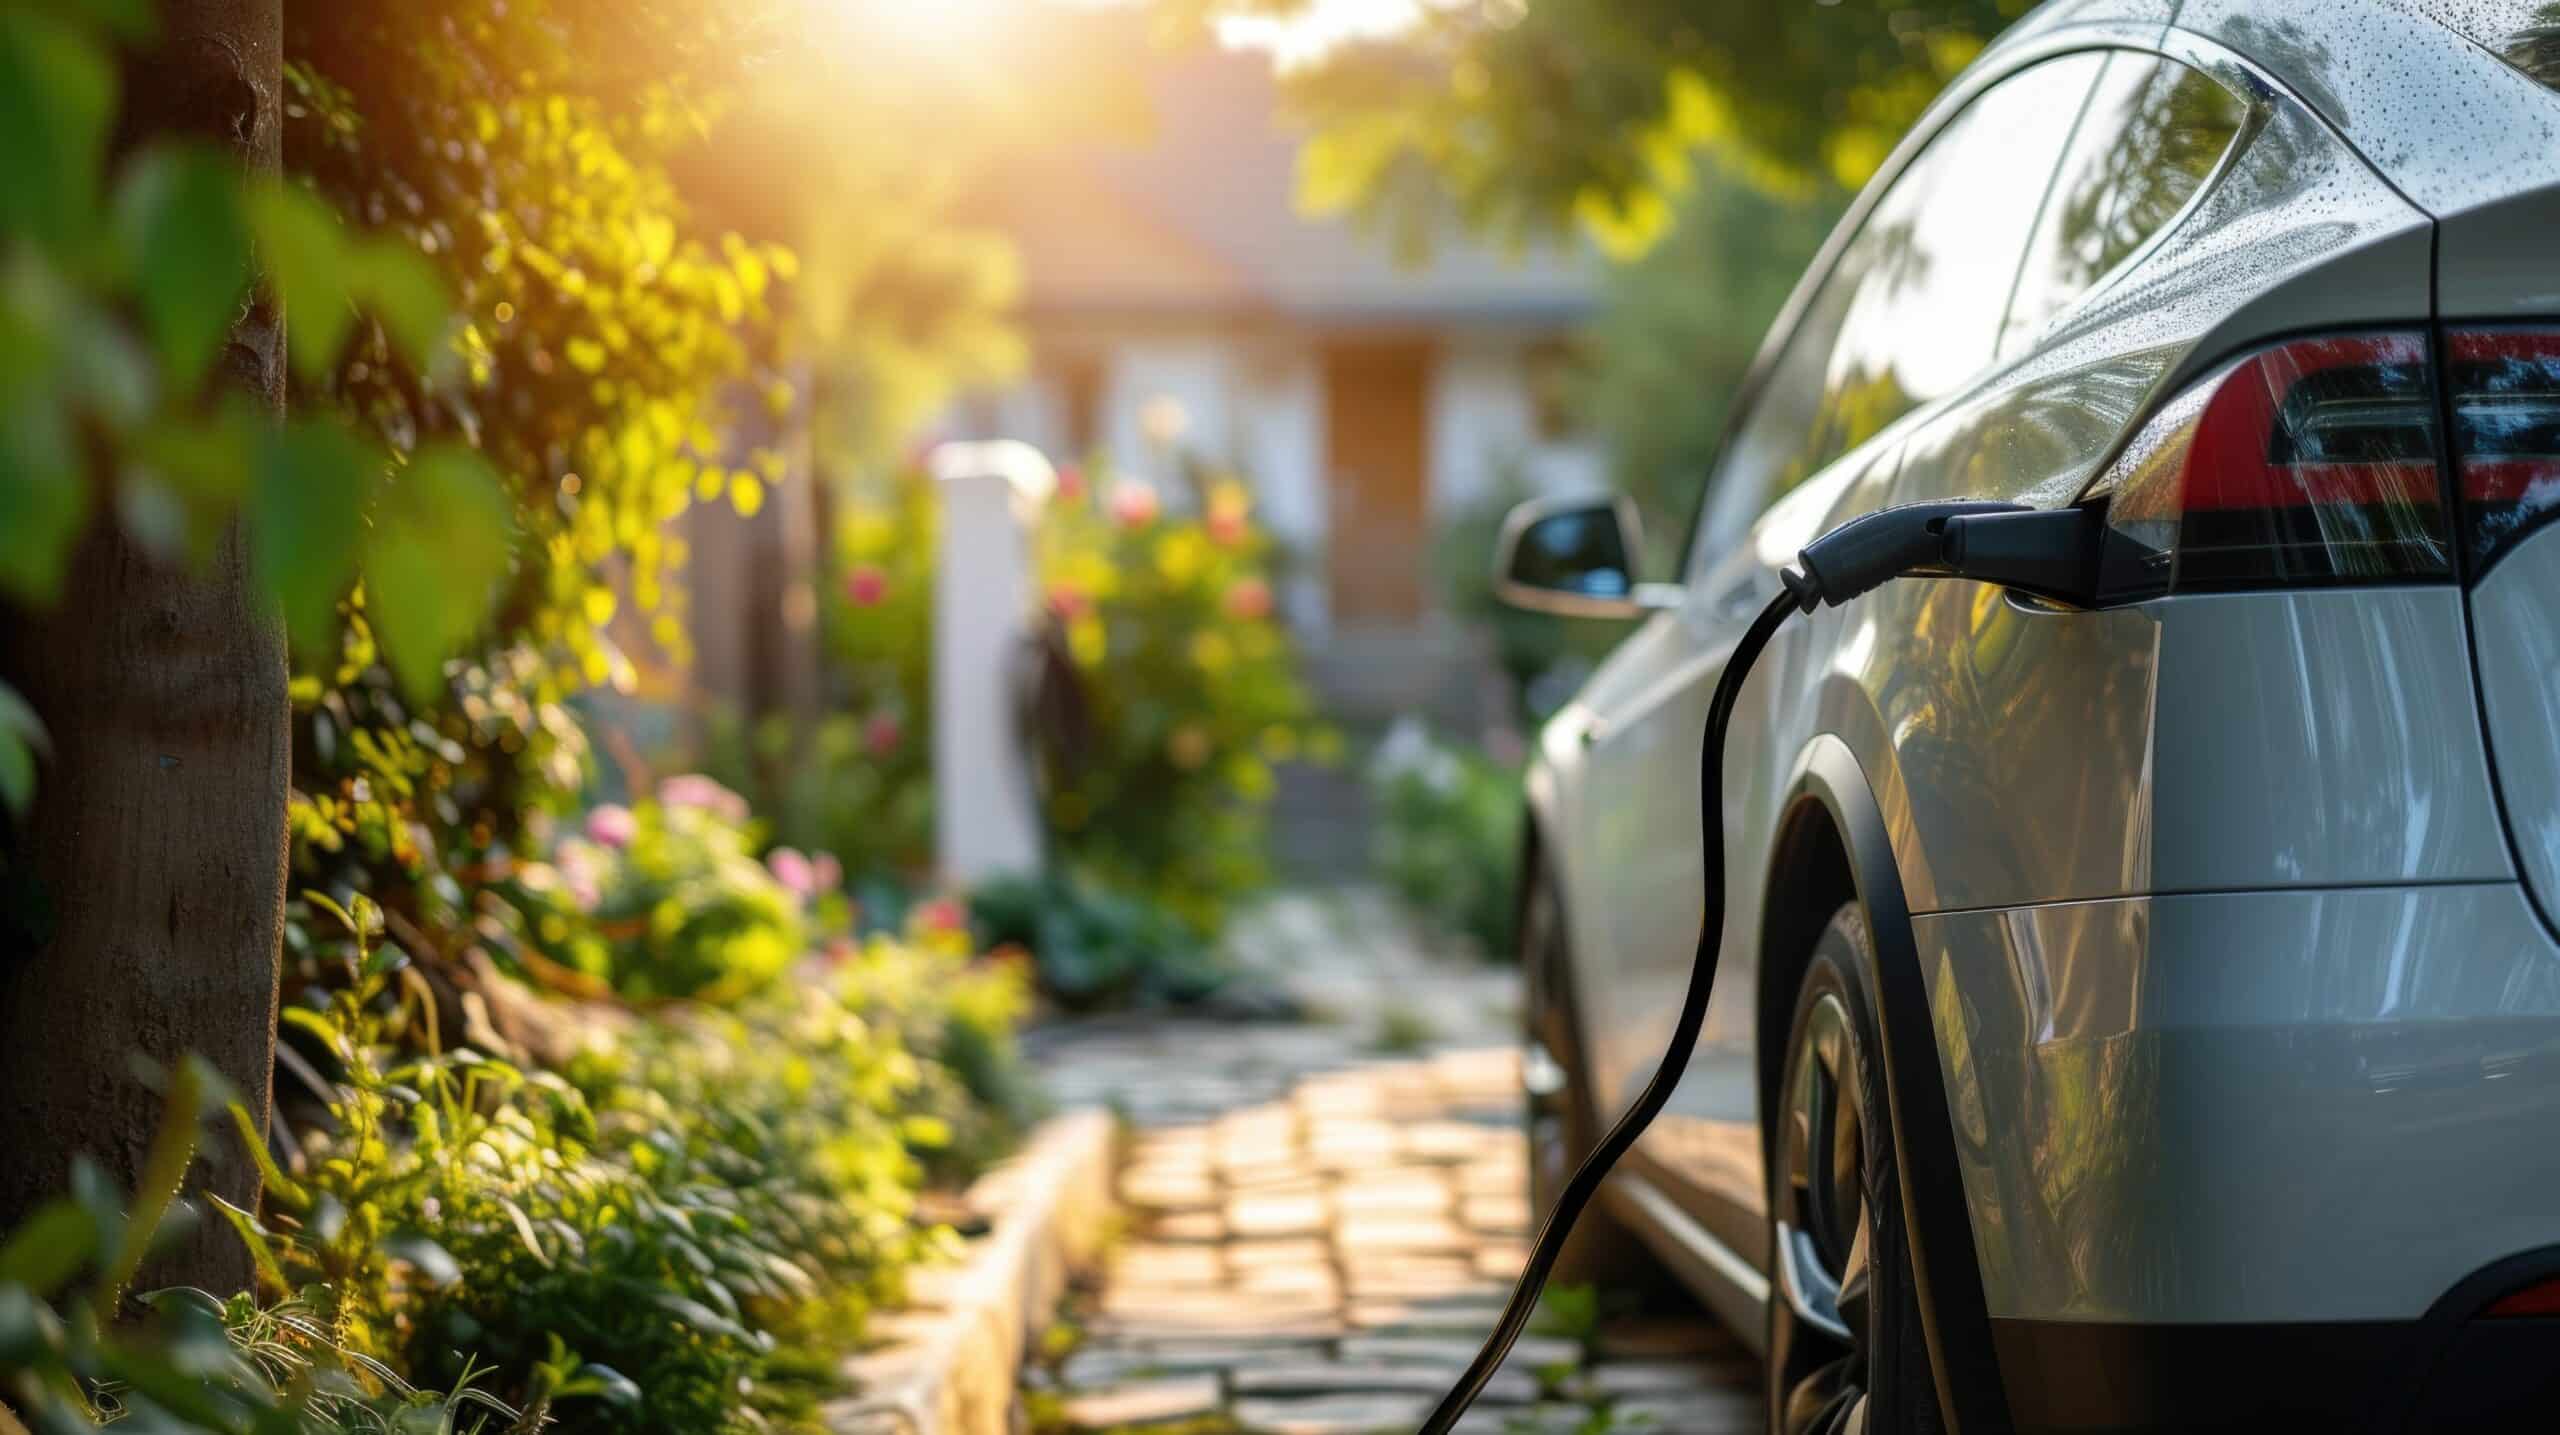 www.appr.com : Can an electric vehicle be charged at home?